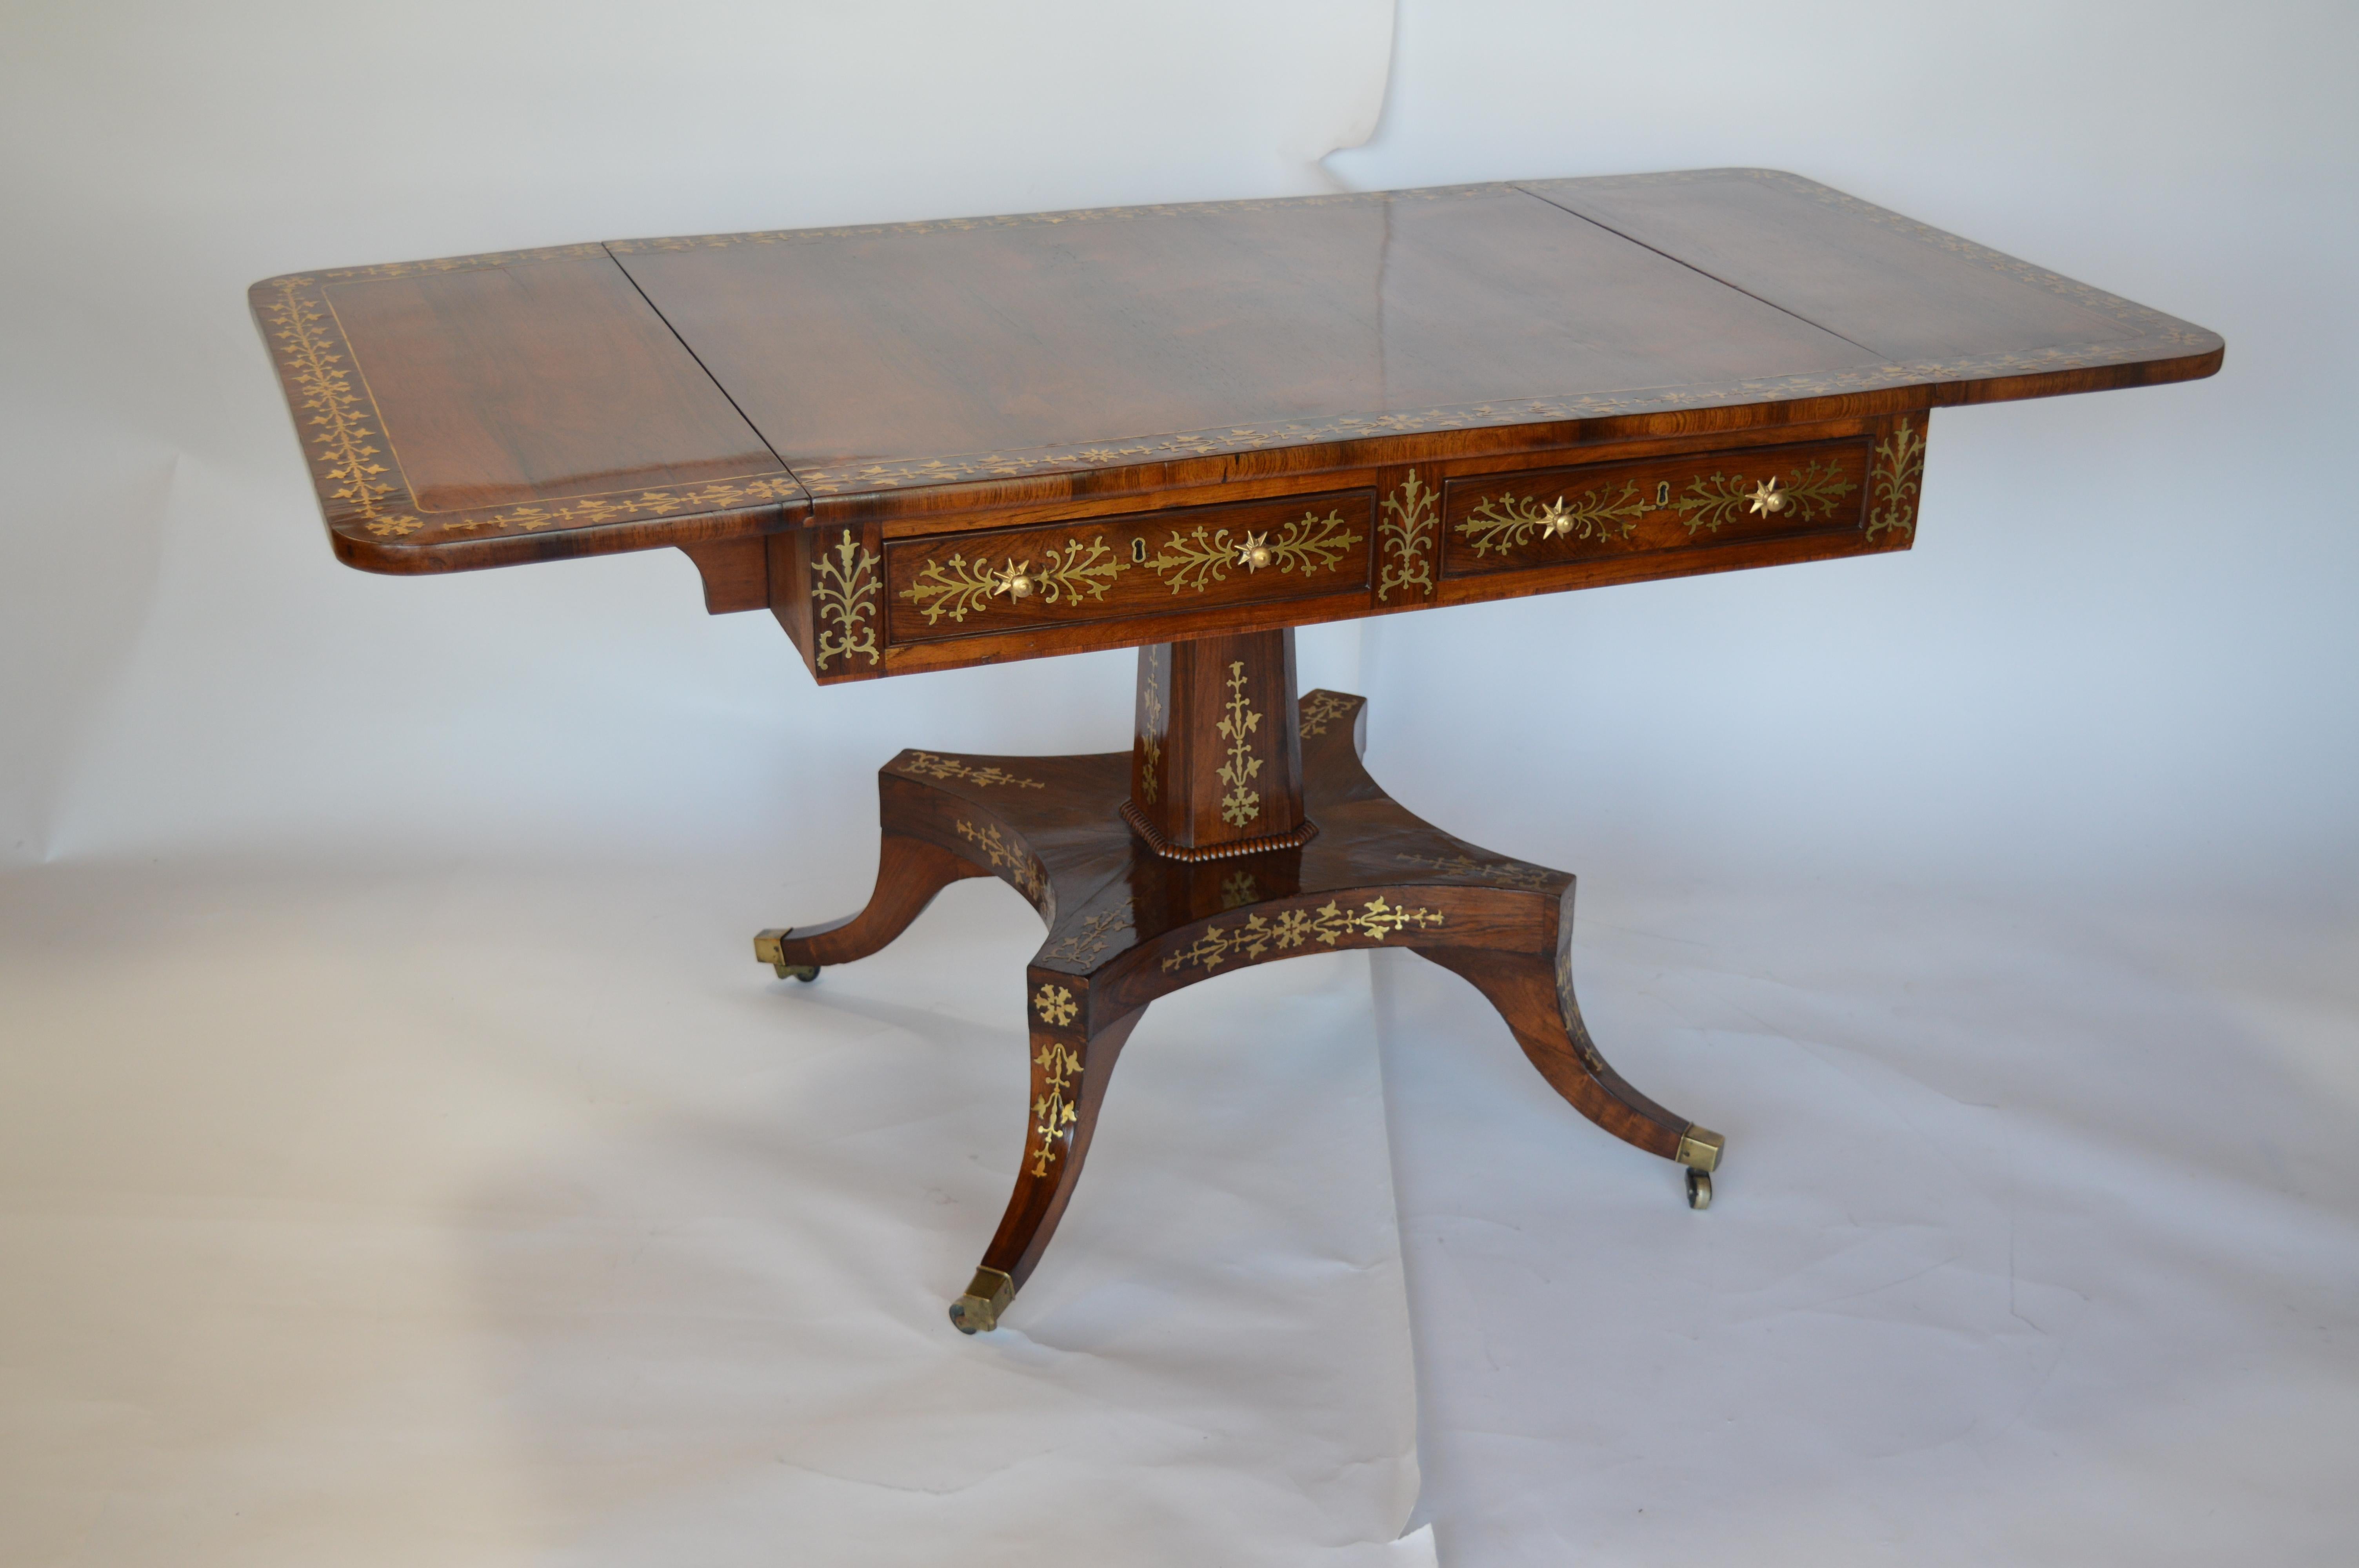 Regency Rosewood Pedestal Table with Brass Inlaid In Good Condition For Sale In Los Angeles, CA